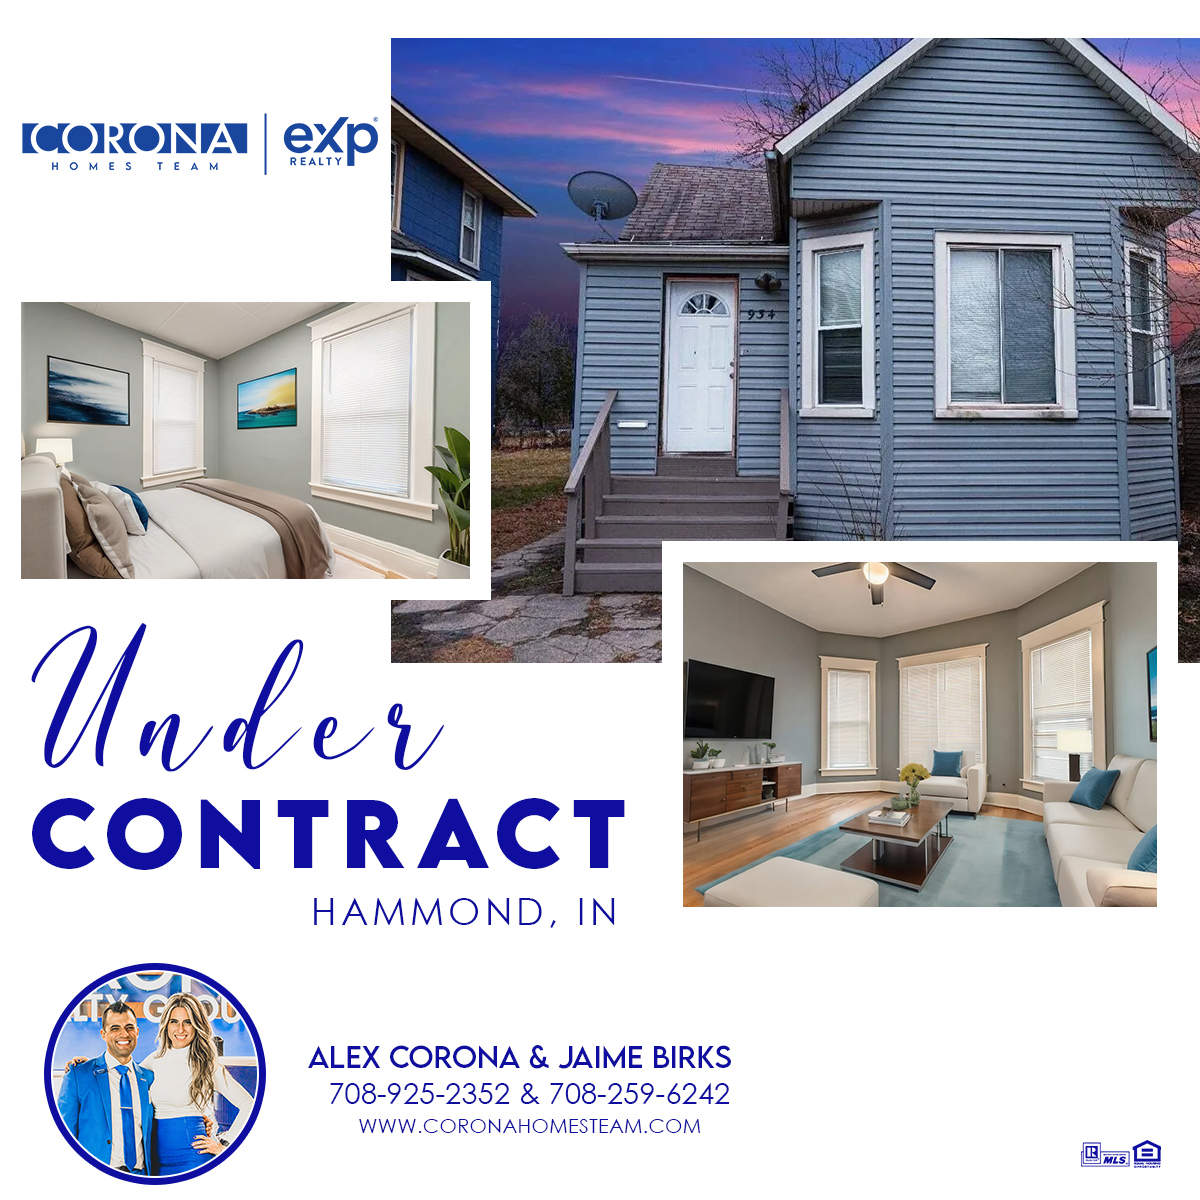 UNDER CONTRACT!!! 🎉🔑
Cheers to new beginnings! 🎊🏡
#UnderContract #DreamHome #NewBeginnings #HomeSweetHome #Excited #RealEstateJourney #Grateful 🏠🔑